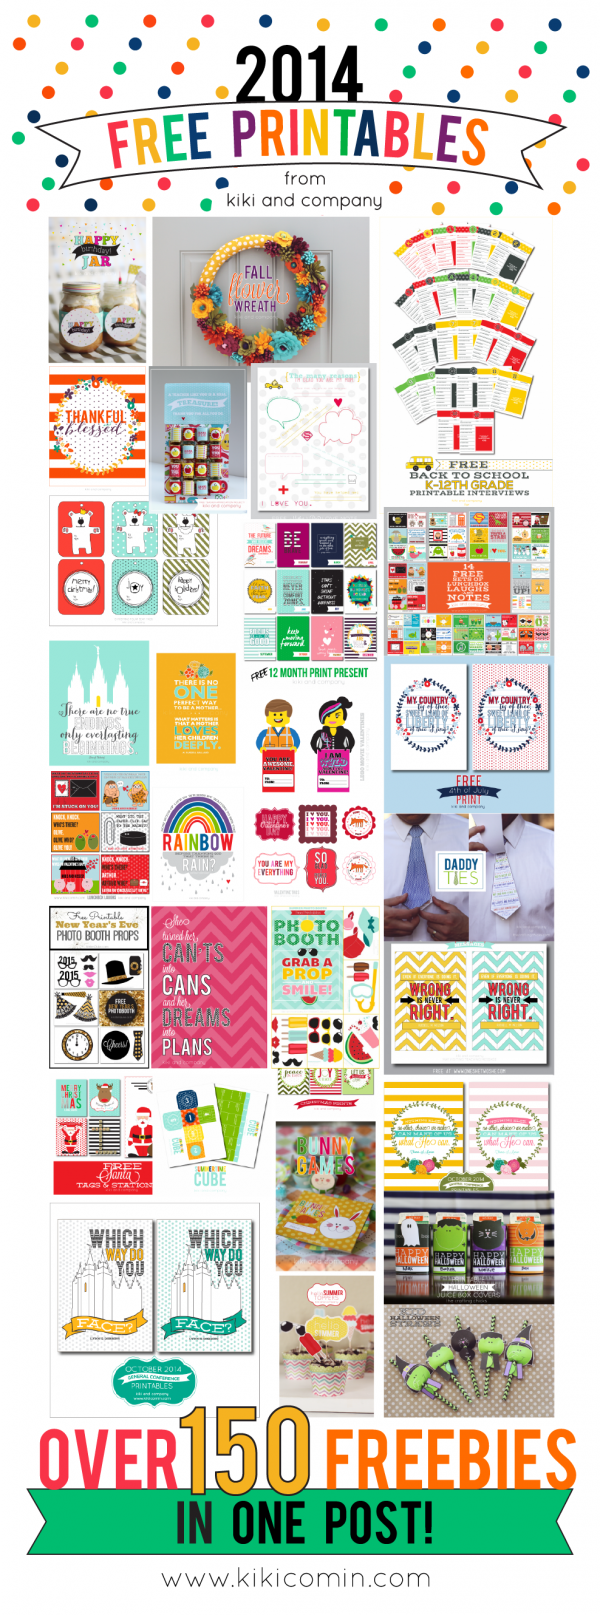 2014-Free-Printables-from-Kiki-and-Company.-Over-150-free-printables-in-one-post-e1420059446121